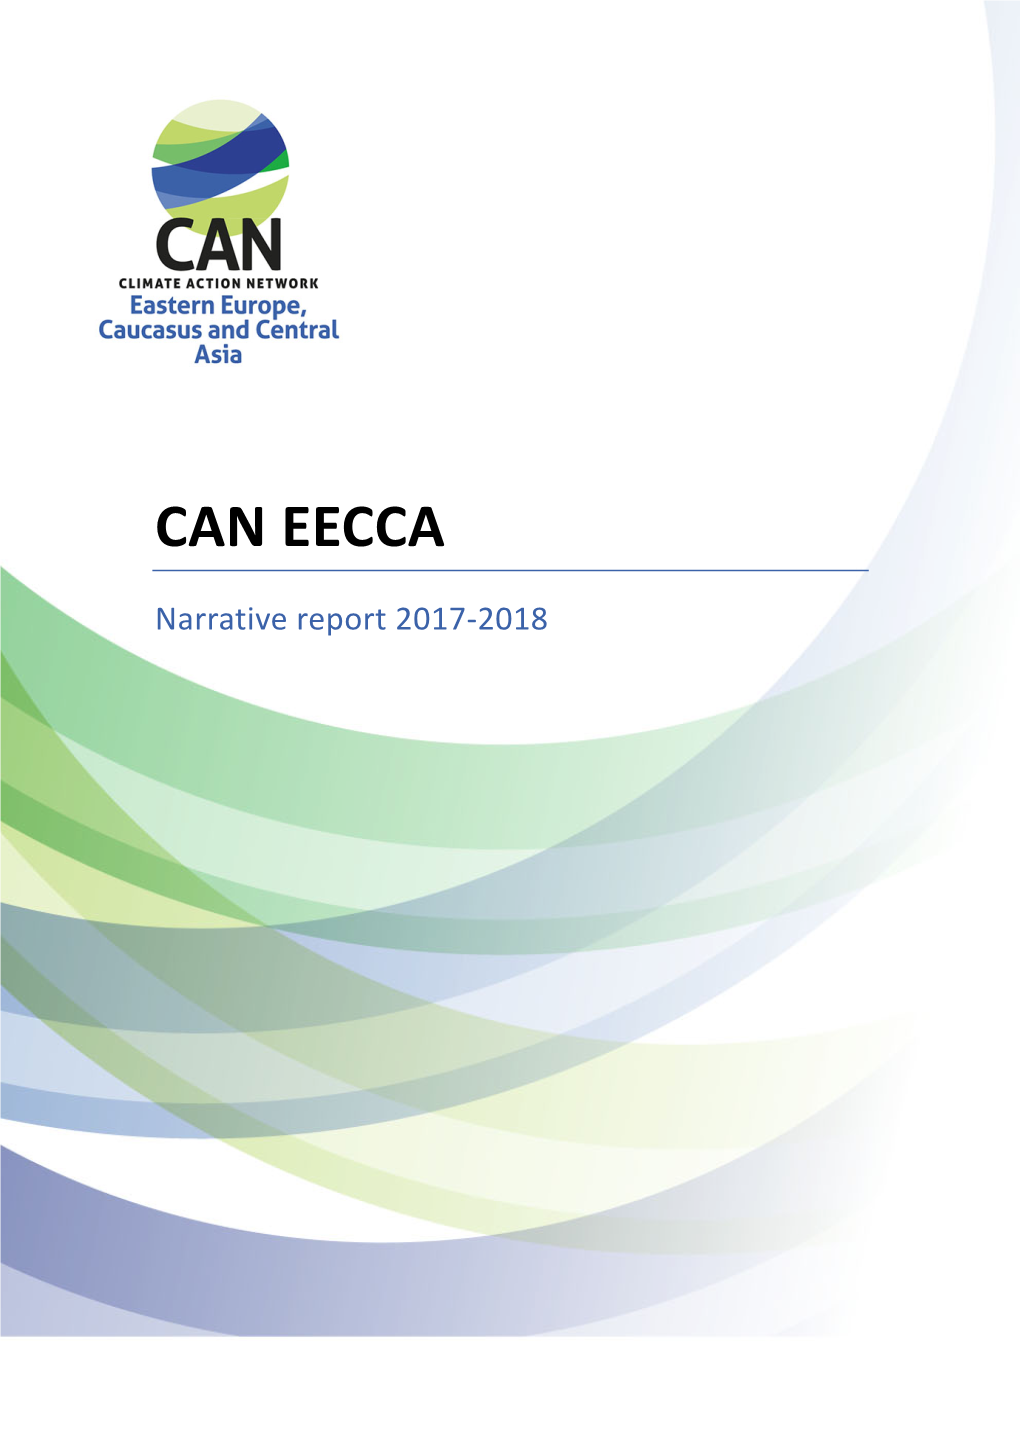 1.2 CAN EECCA General Assembly